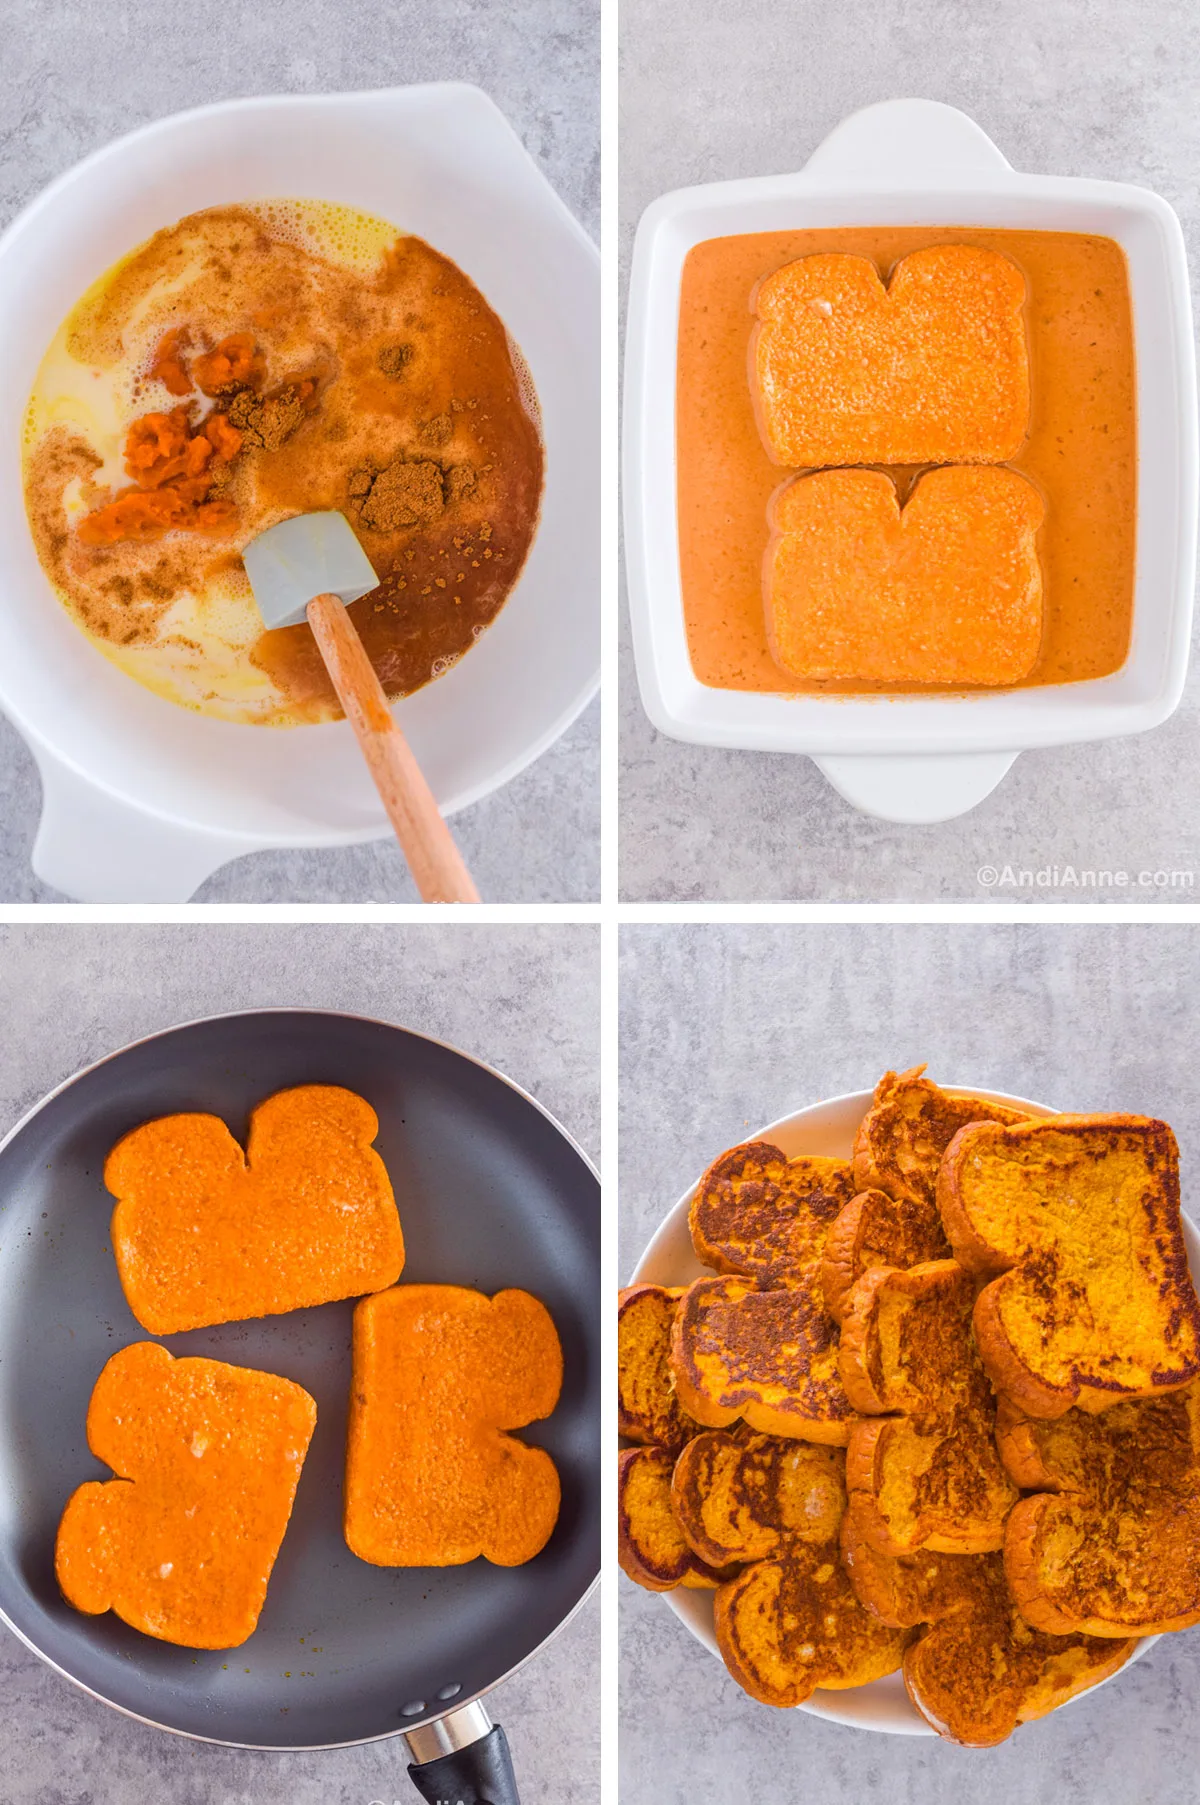 Four images showing steps to make recipe including a white bowl with batter ingredients dumped in with spatula. A square baking dish with orange batter and two slices of bread soaking. A frying pan with three slices of dipped uncooked french toast. And a white plate with a stack of cooked french toast slices.